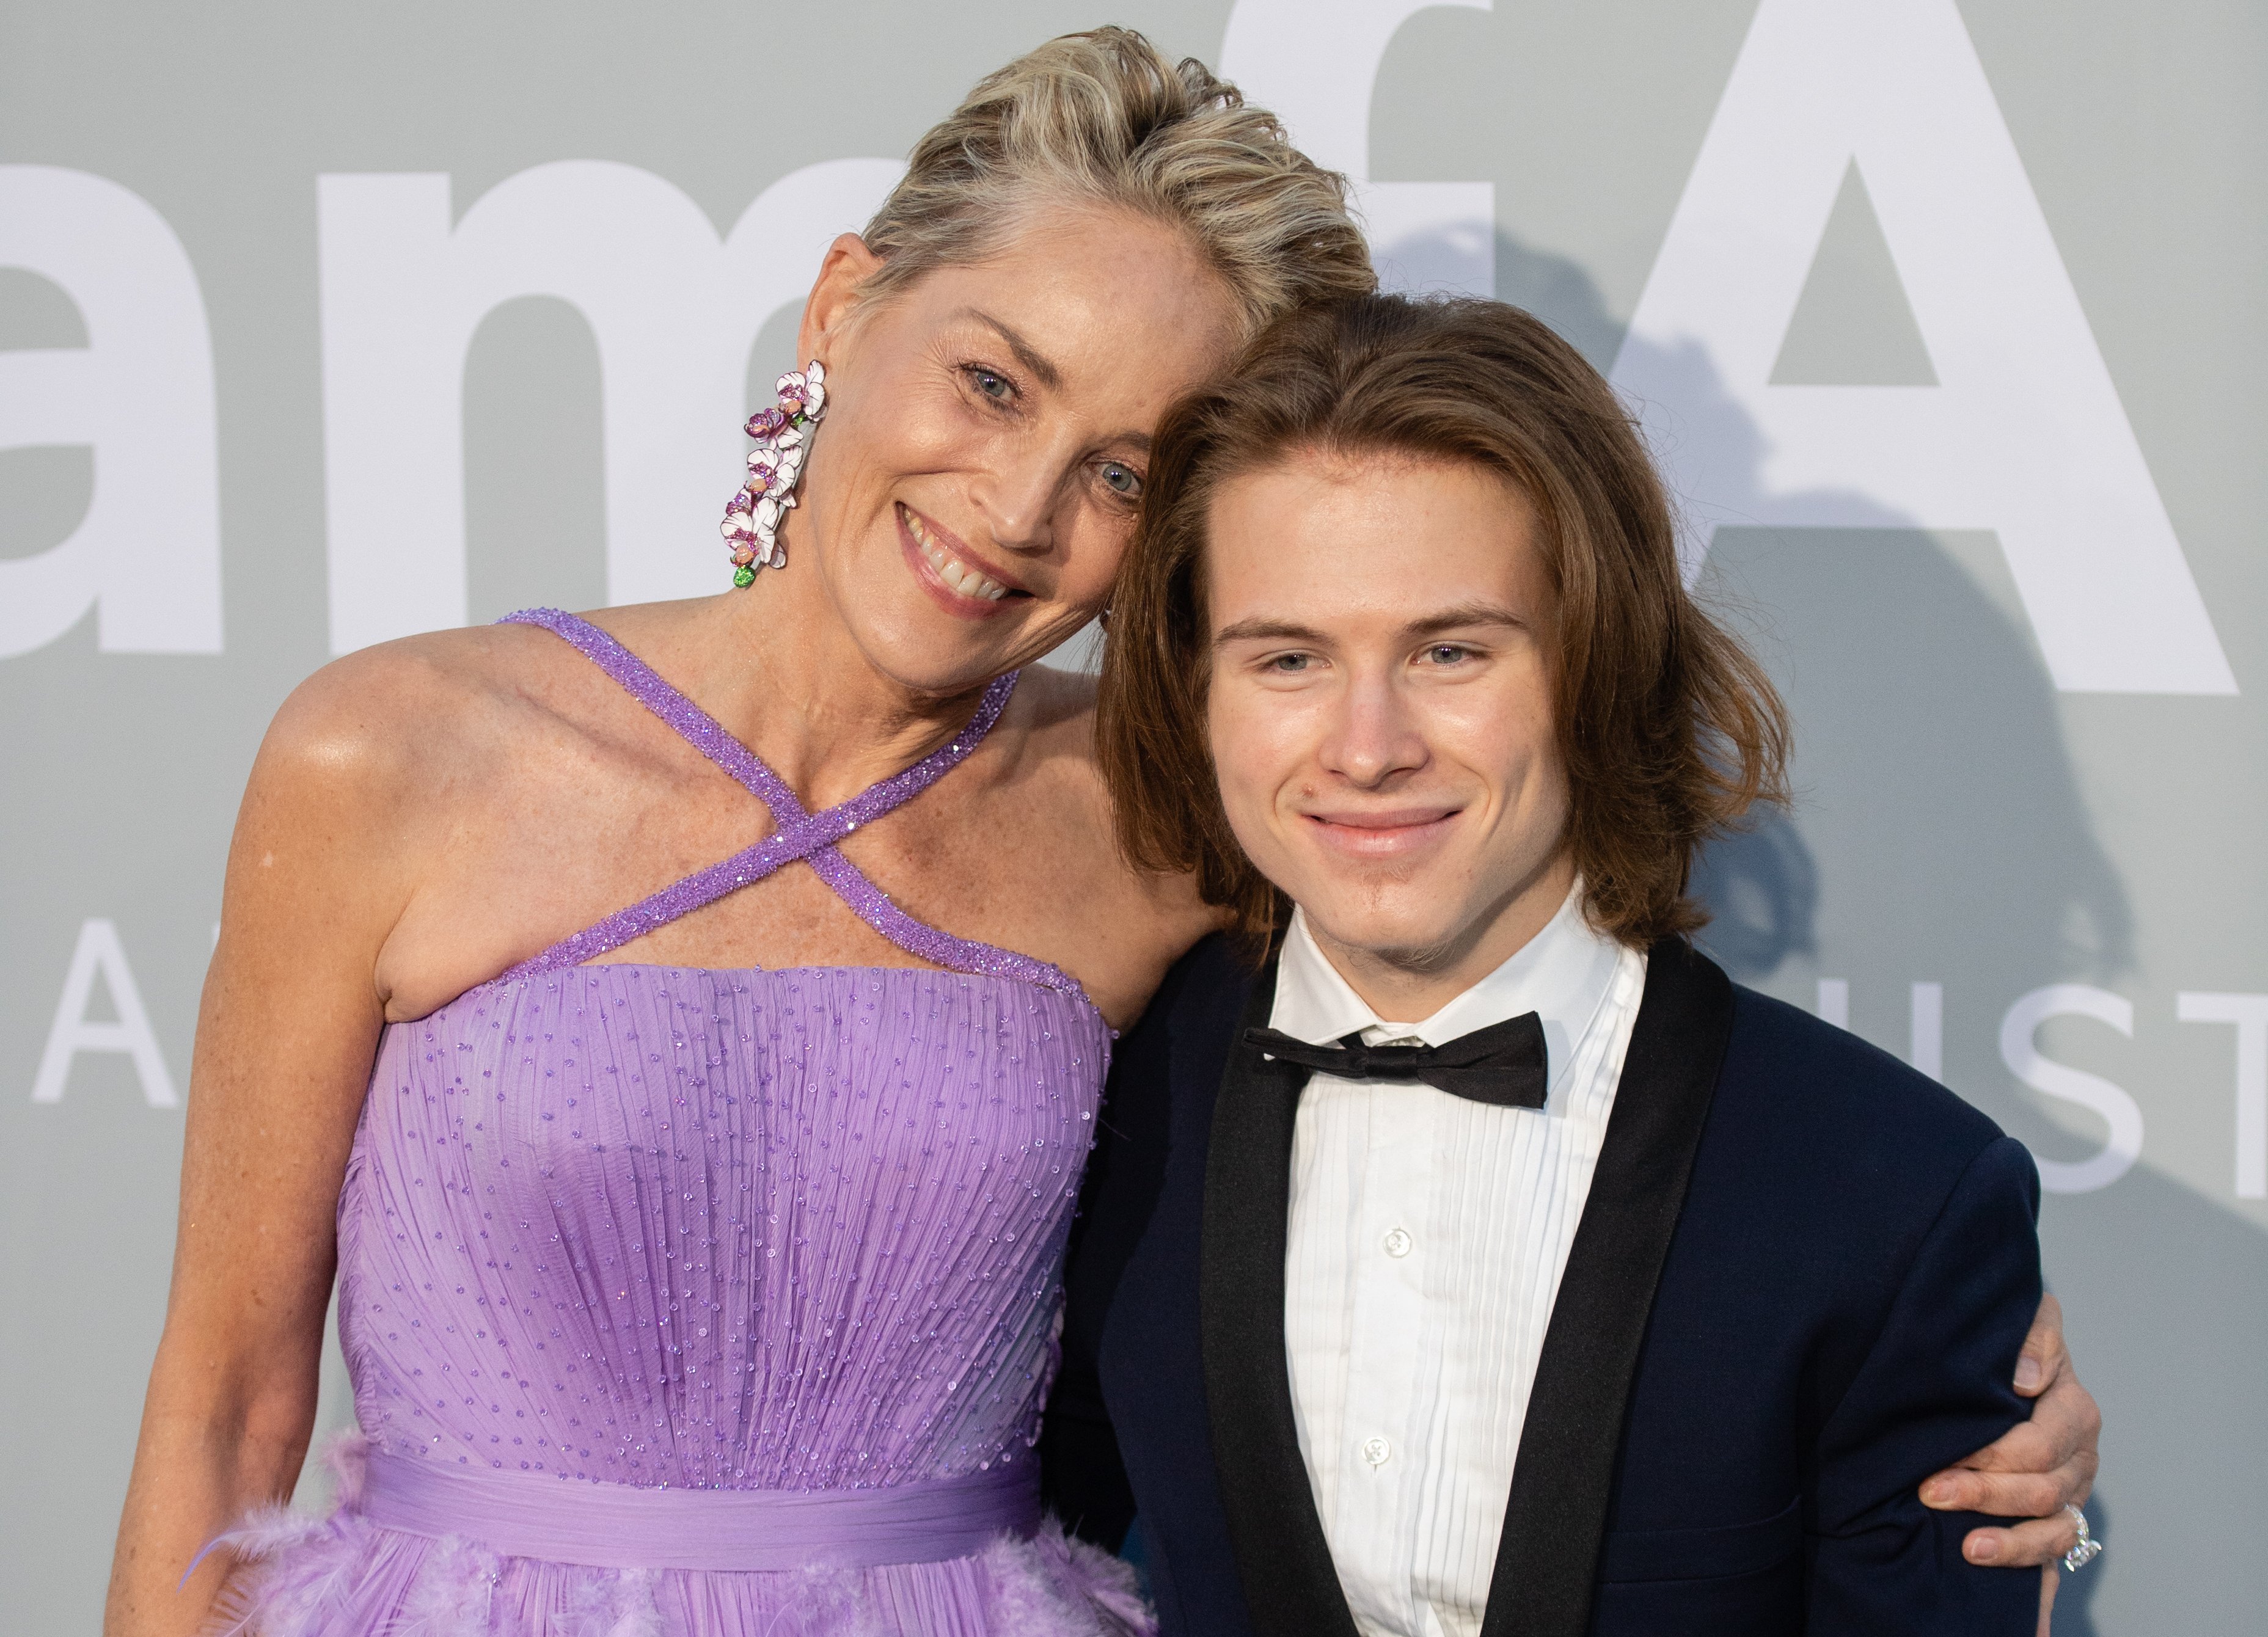 Sharon Stone and Roan Joseph Bronstein Stone at the amfAR Cannes Gala 2021 during the 74th Annual Cannes Film Festival | Photo: Getty Images